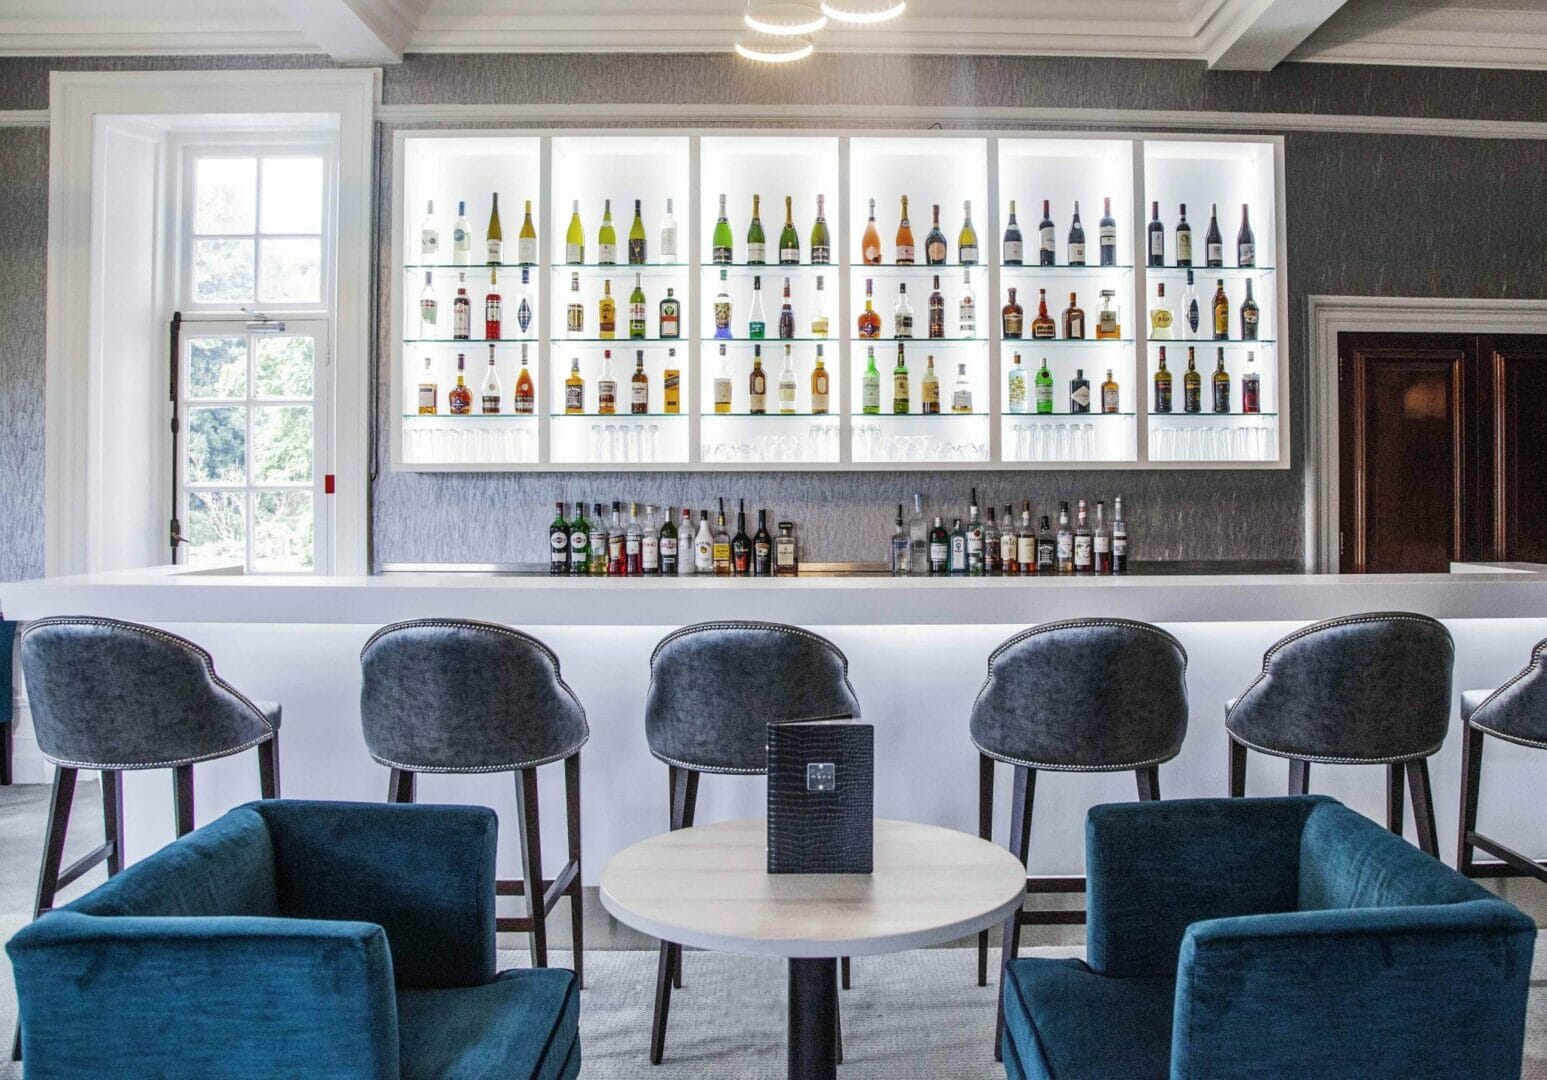 Glasses are clinking in a Surrey hotel’s sophisticated new bar